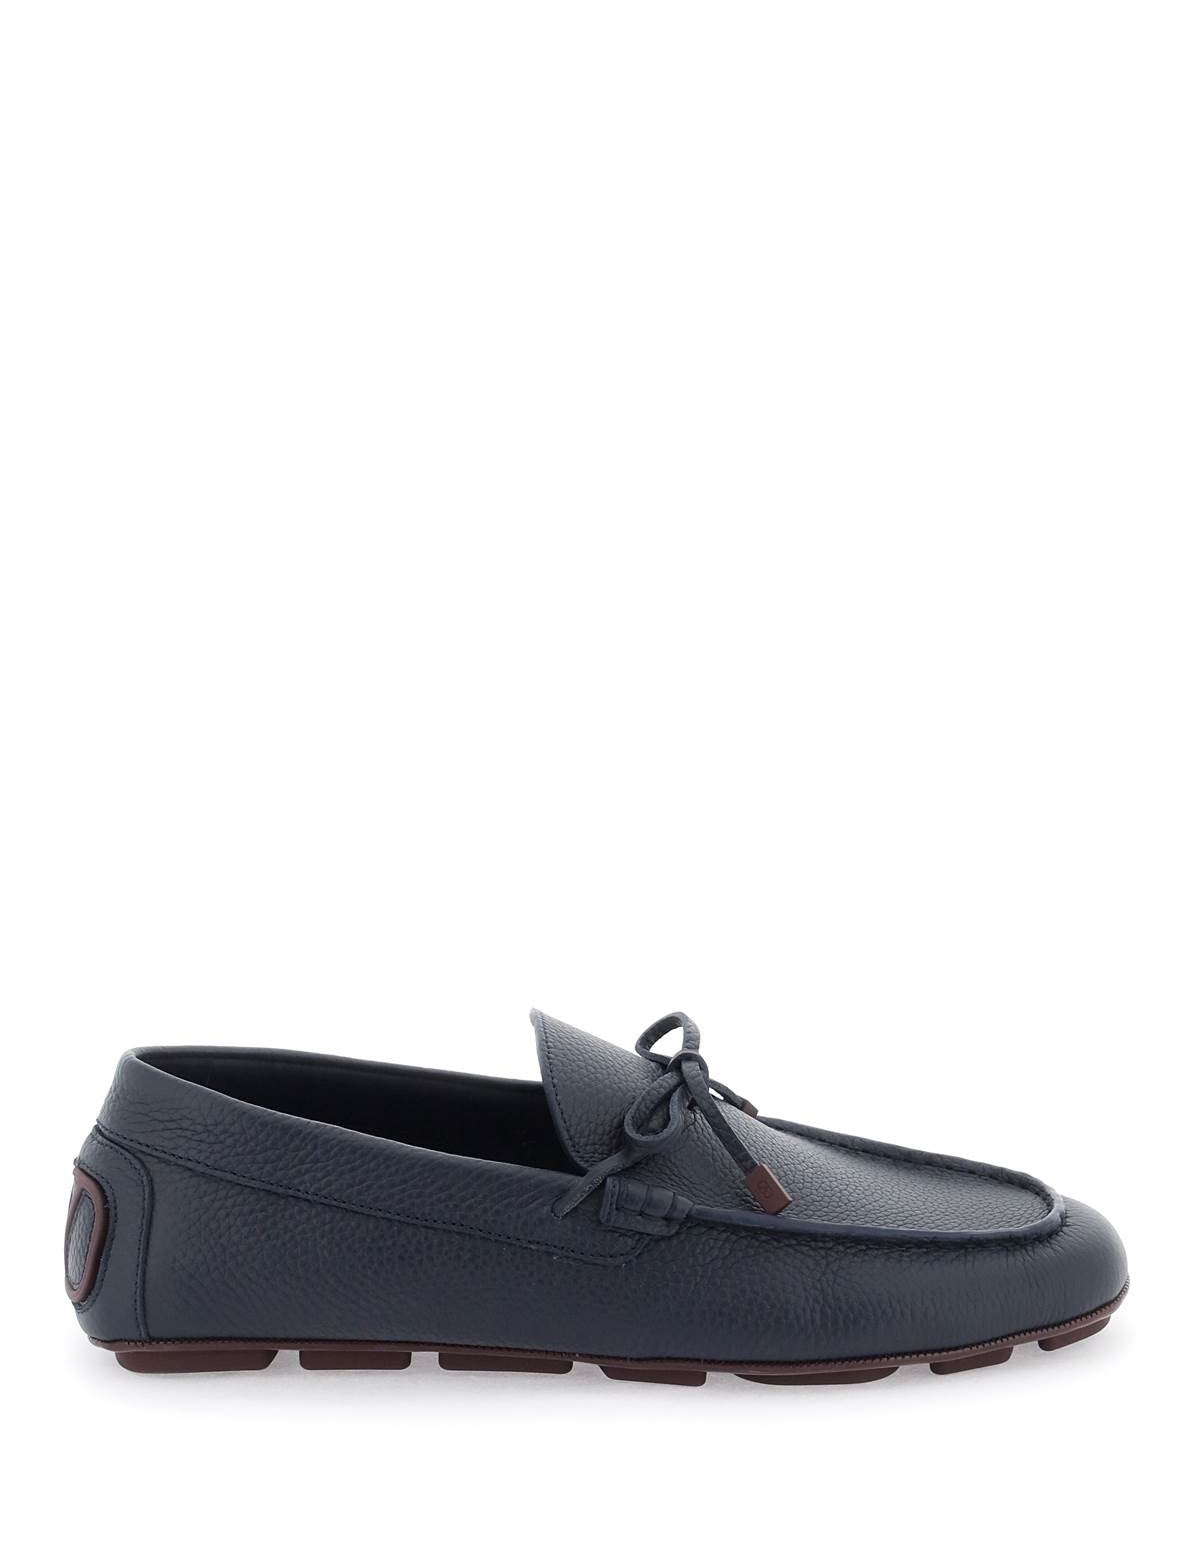 valentino-garavani-leather-loafers-with-bow_acd4ba47-6f2a-42a4-8548-9eb128432d17.jpg